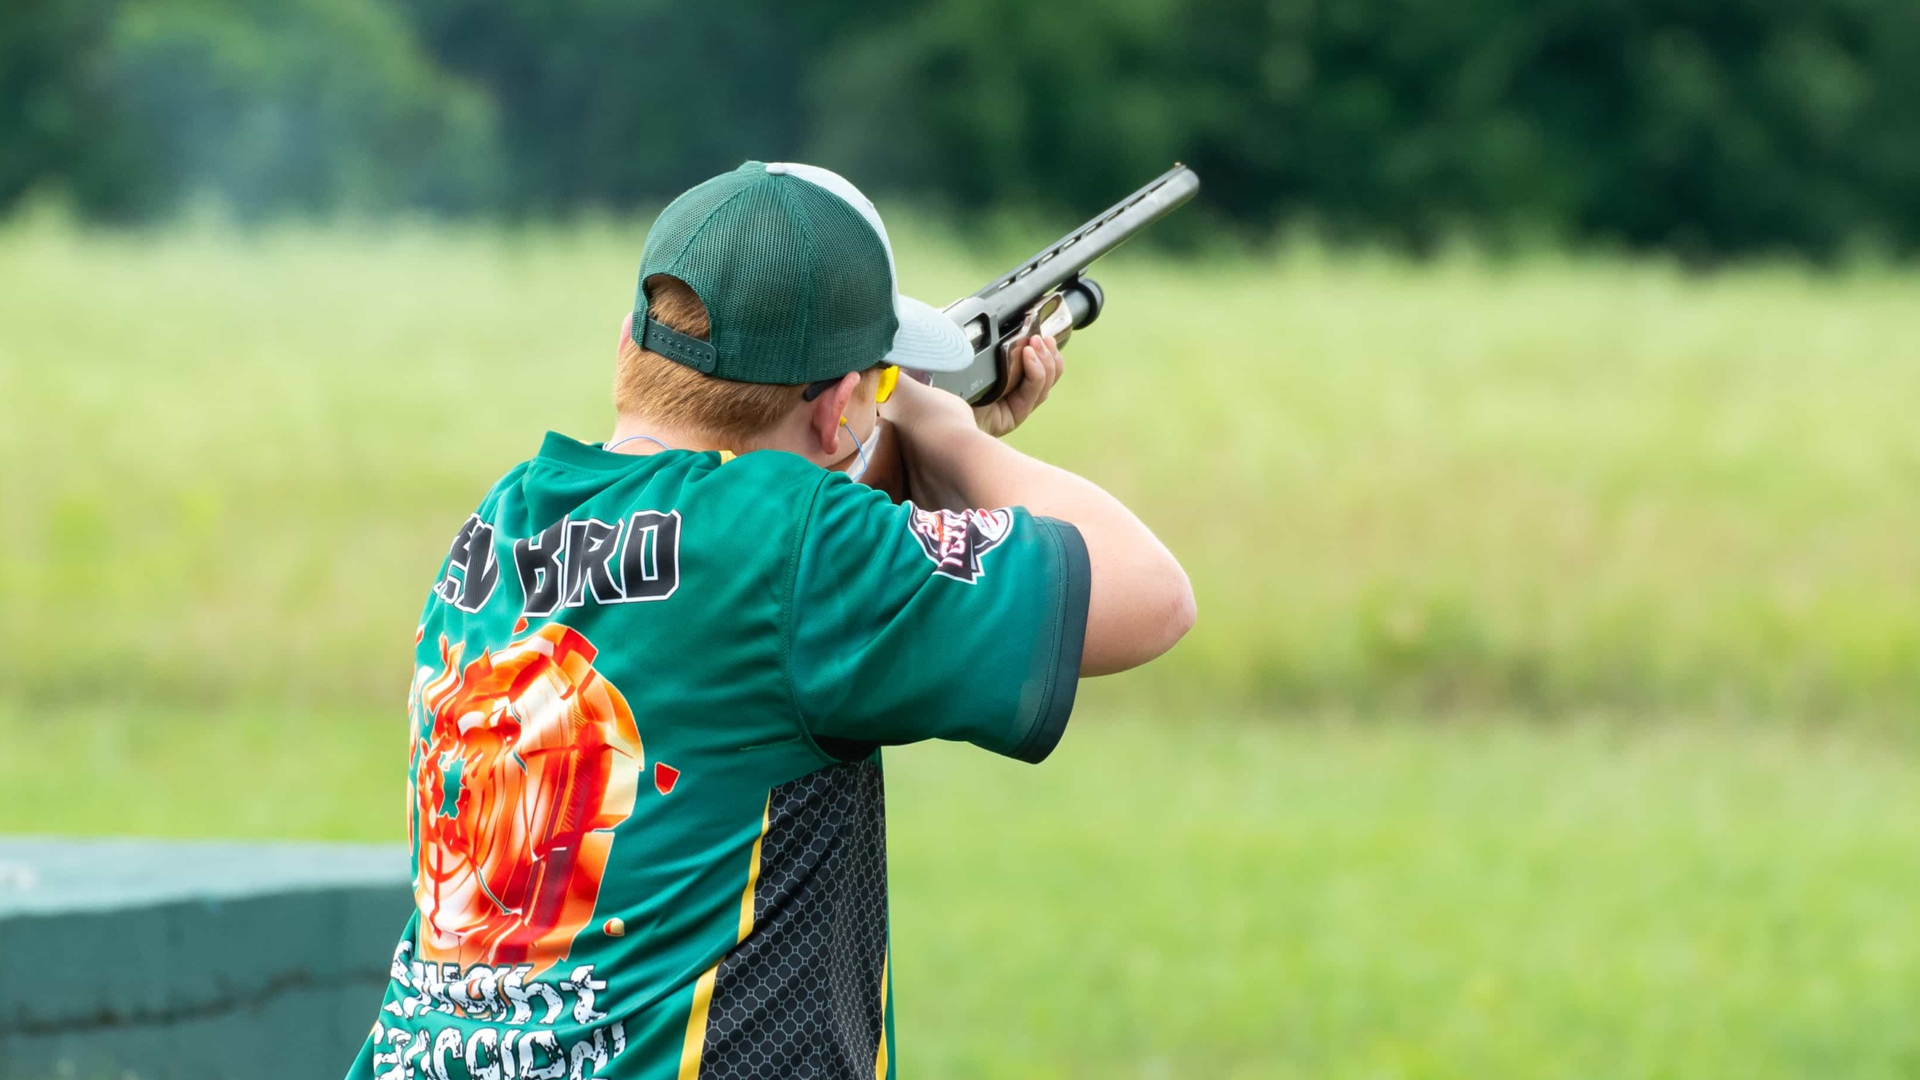 Competitor at Minnesota High School State Trap Championship